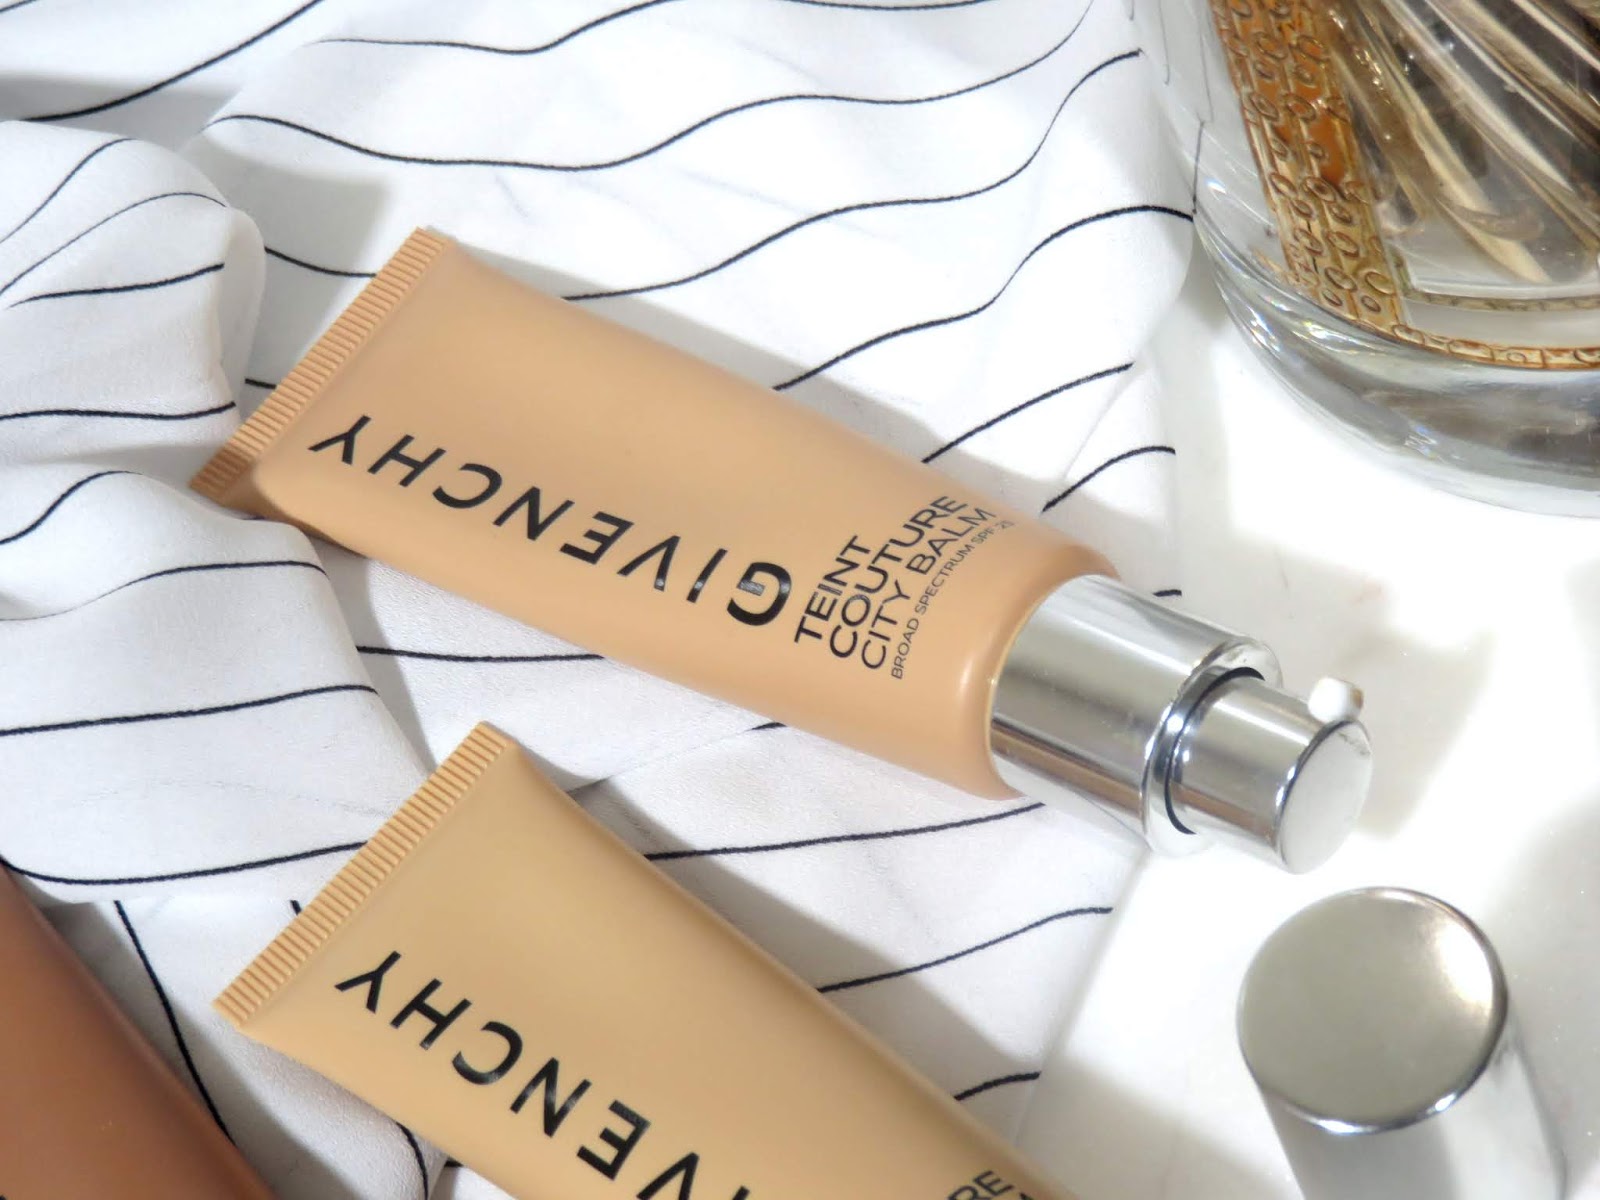 Givenchy Teint Couture City Balm Radiant Perfecting Skin Tint SPF 25 Review and Swatches